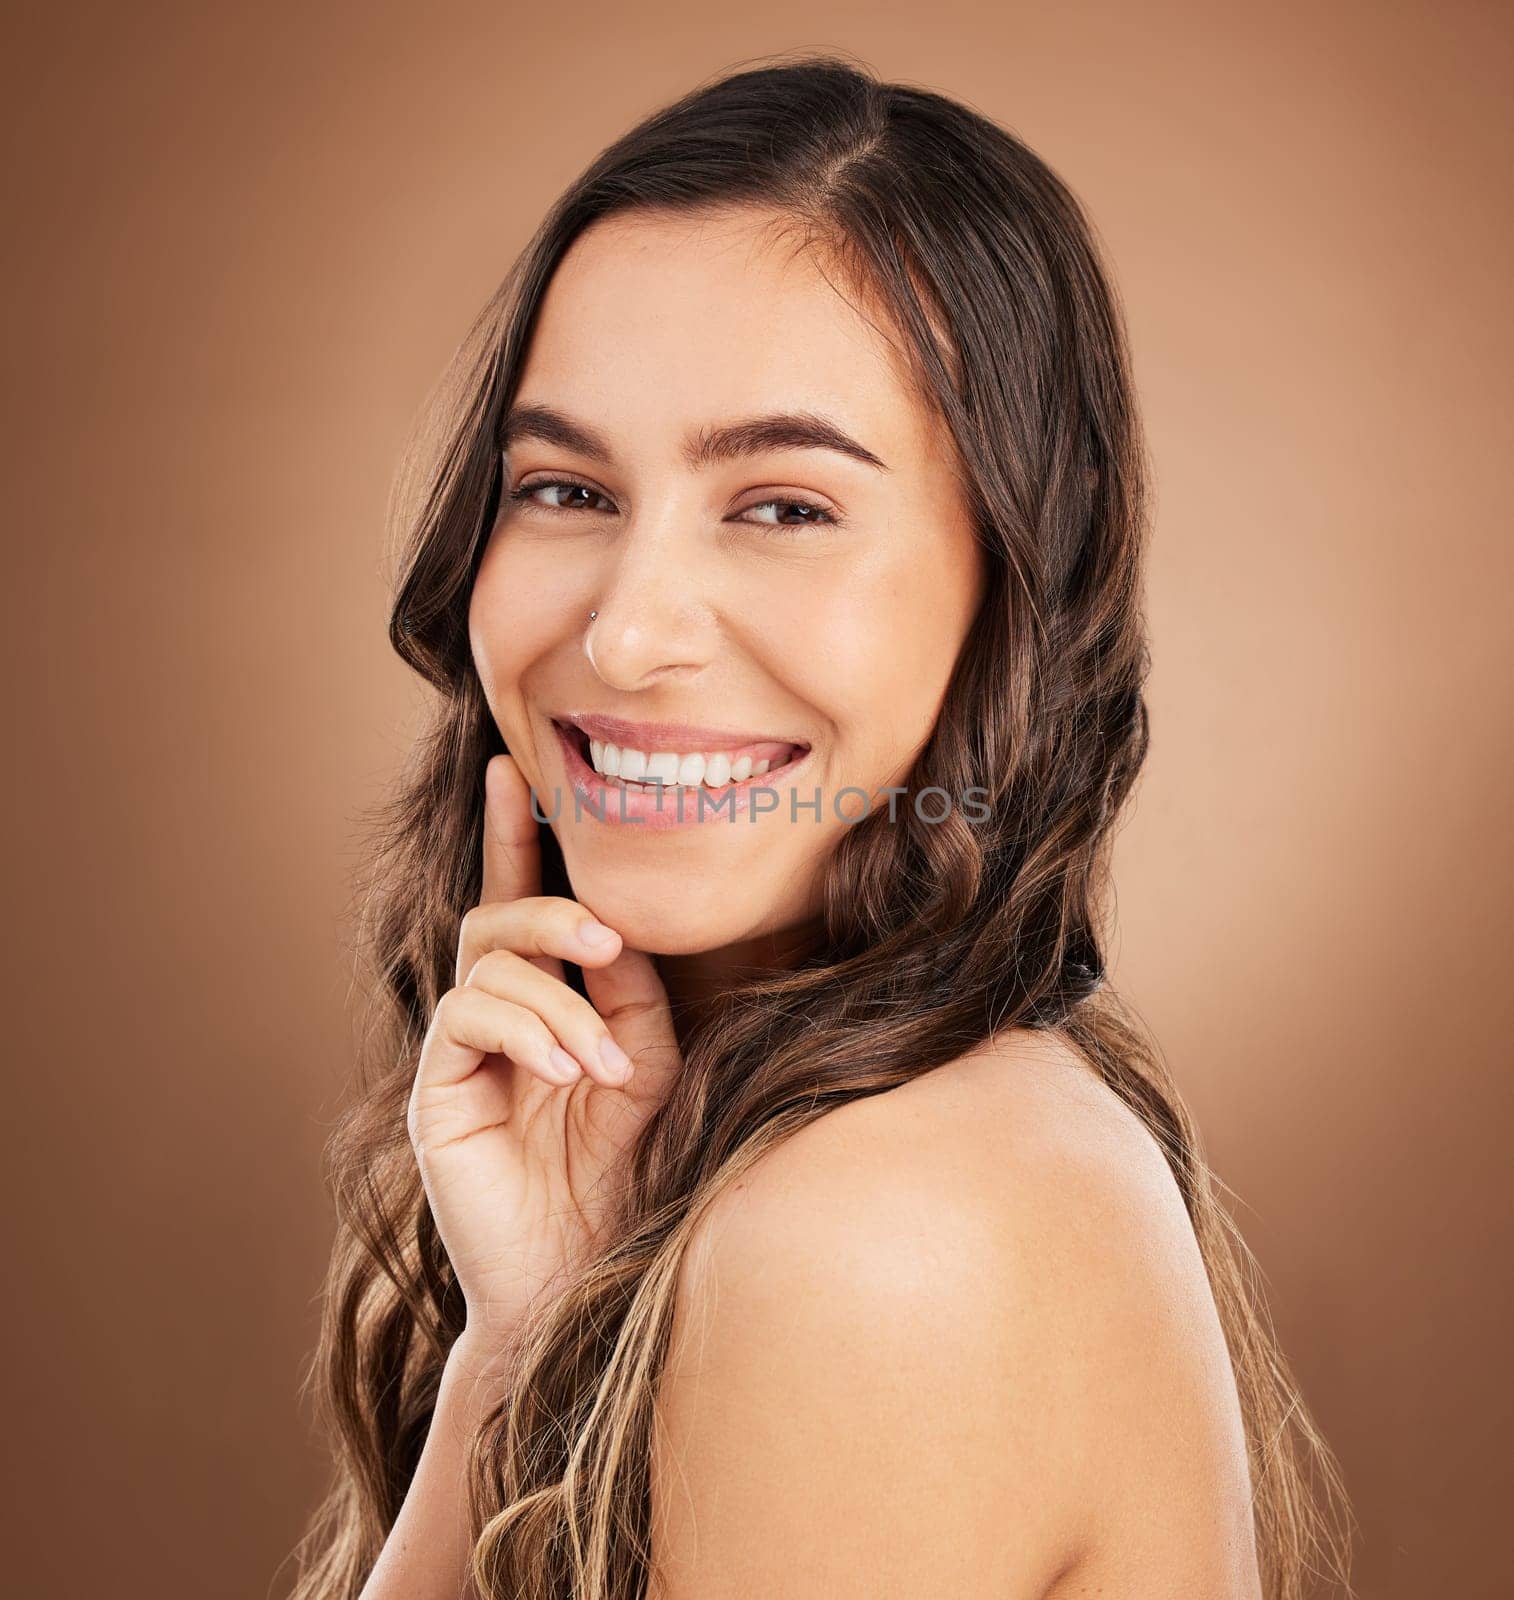 Portrait, beauty and woman in studio for hair, treatment and cosmetics against a brown background. Haircare, face and girl smile for natural, curly or wavy, texture or keratin, textures and confident.